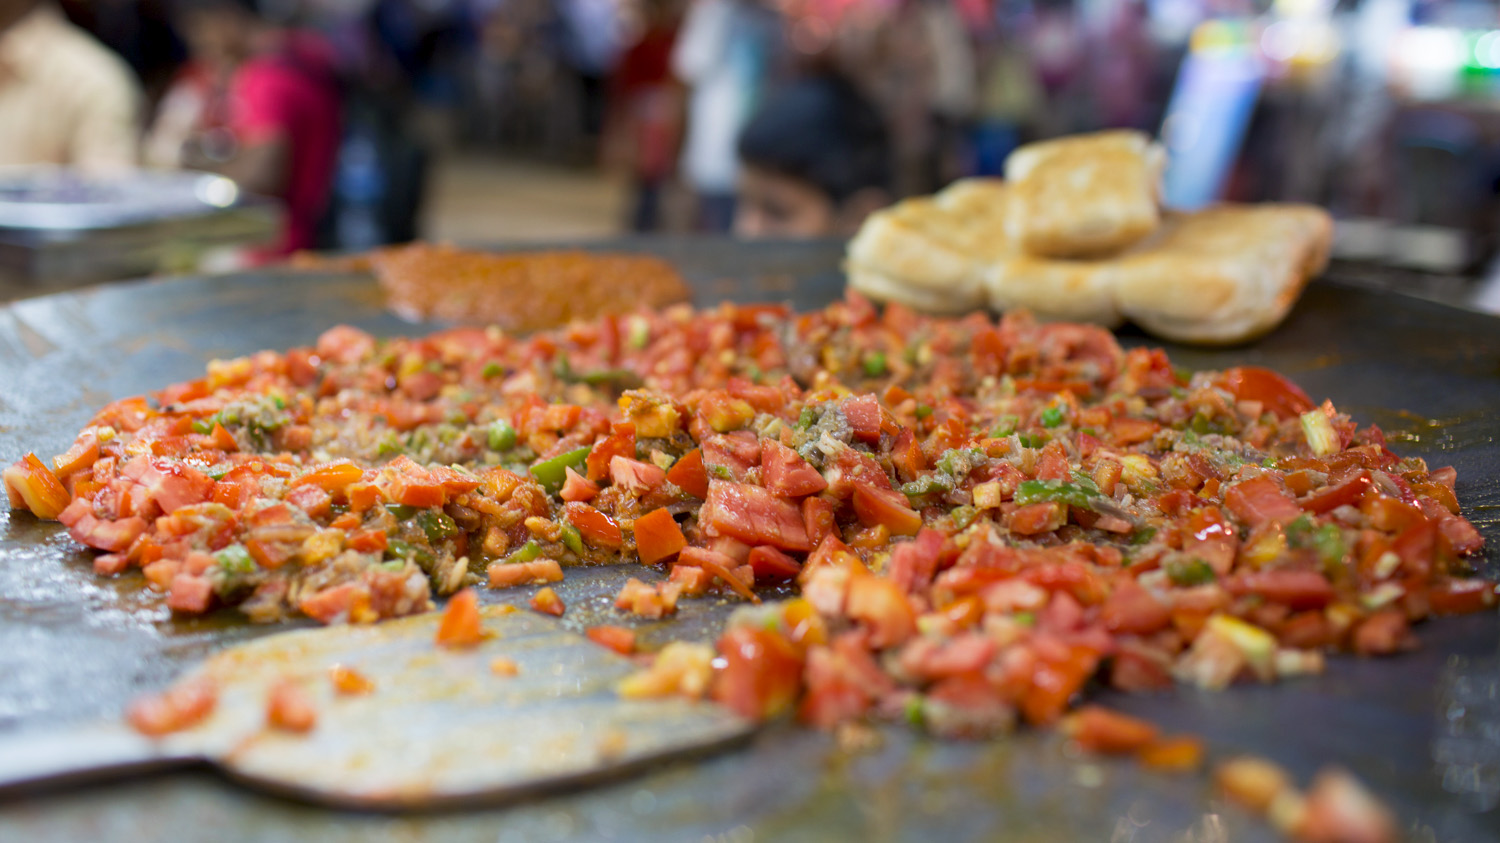 As you wind your way through Chowpatty and Mohammad Ali Road, chow down pav bhaji, which is mixed vegetables bhaji cooked on an open pan topped with dollops of butter and served with pav (bread). Photo from RTT